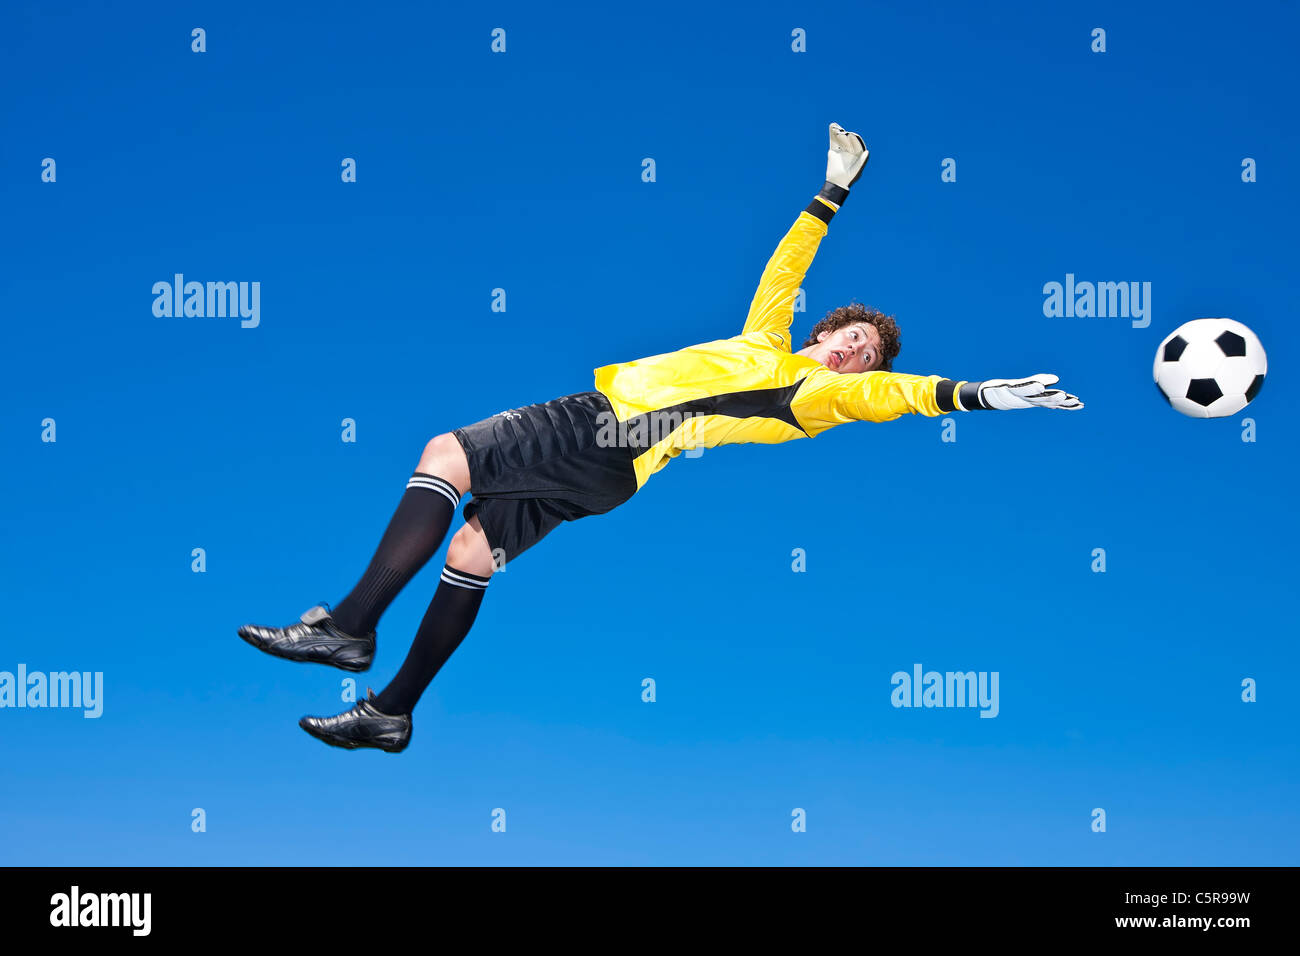 The goalkeeper stretches to try and save a ball. Stock Photo